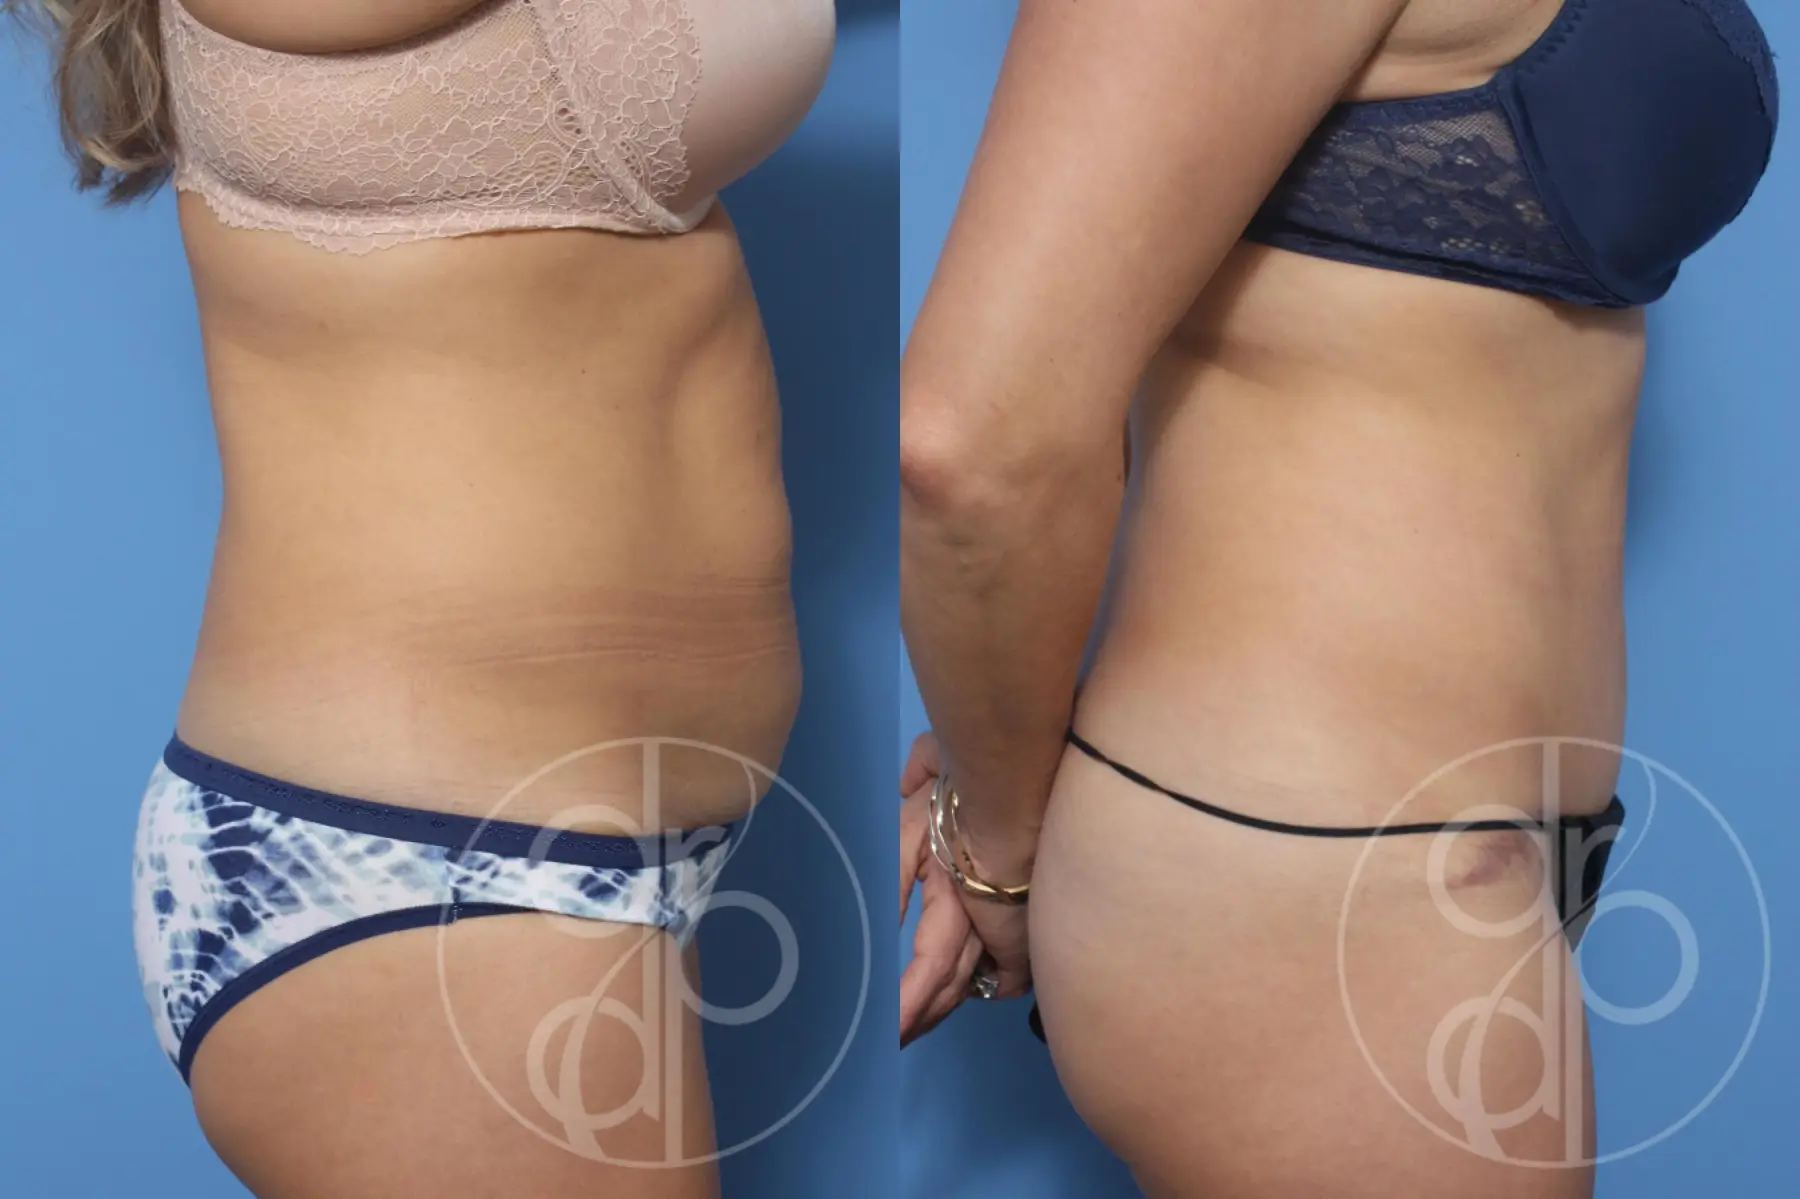 patient 13228 tummy tuck before and after result - Before and After 2